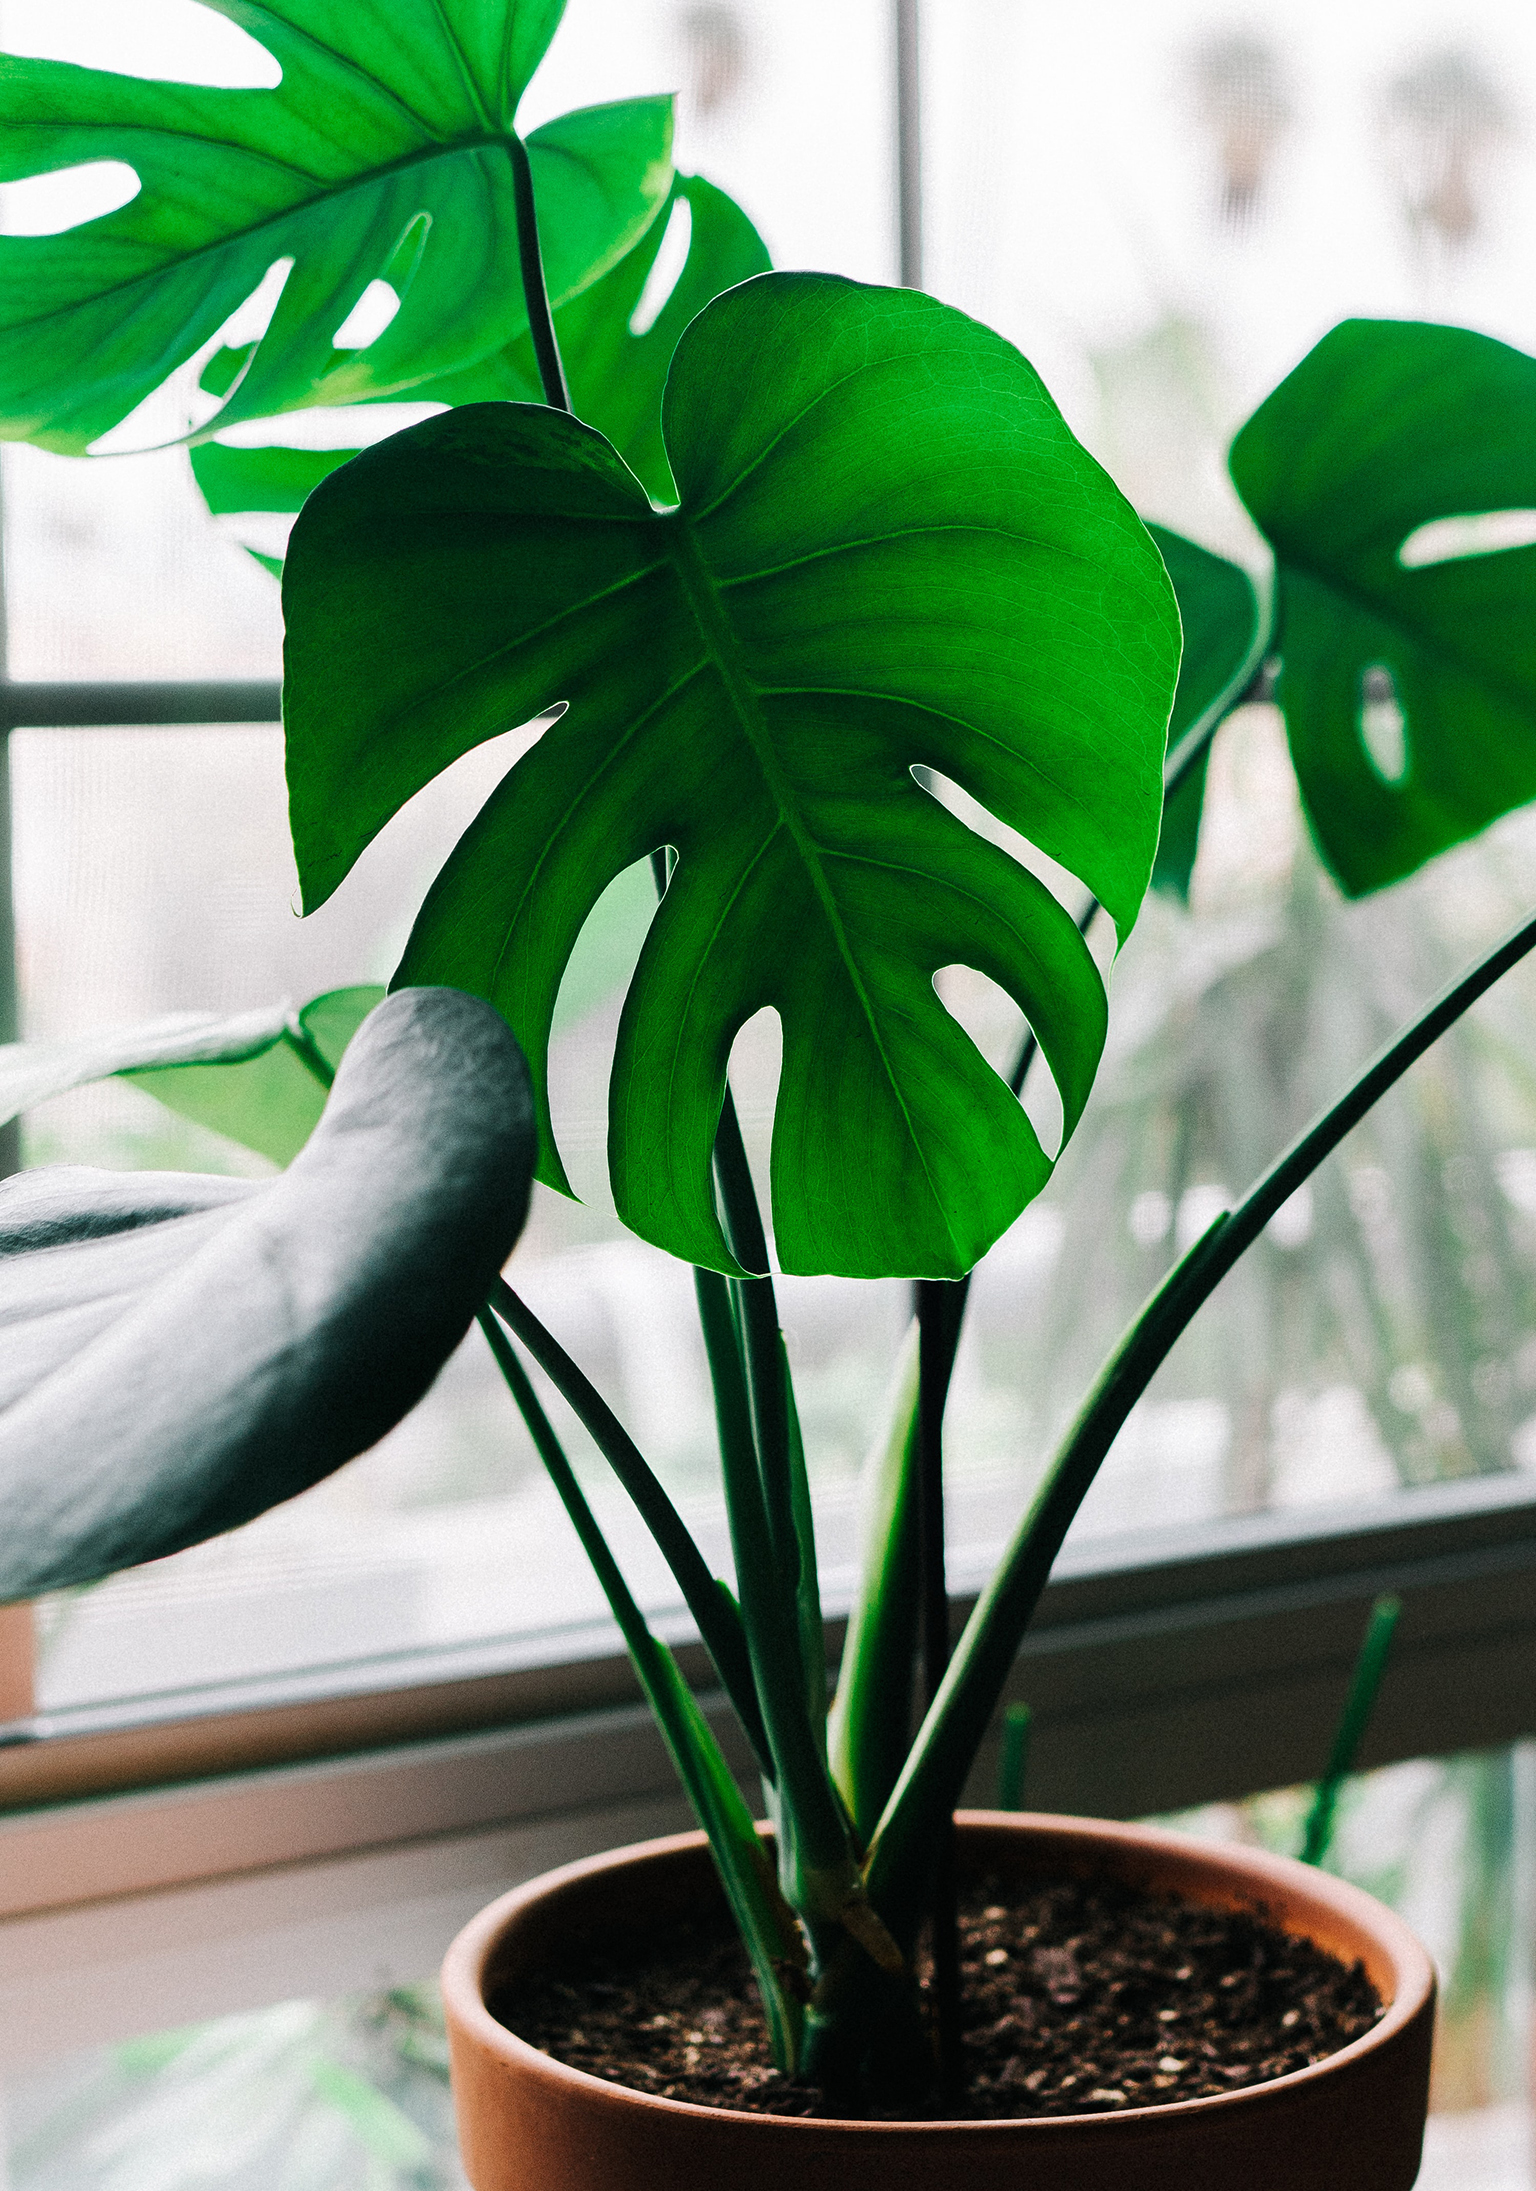 Indoor potted plant, large green leaves